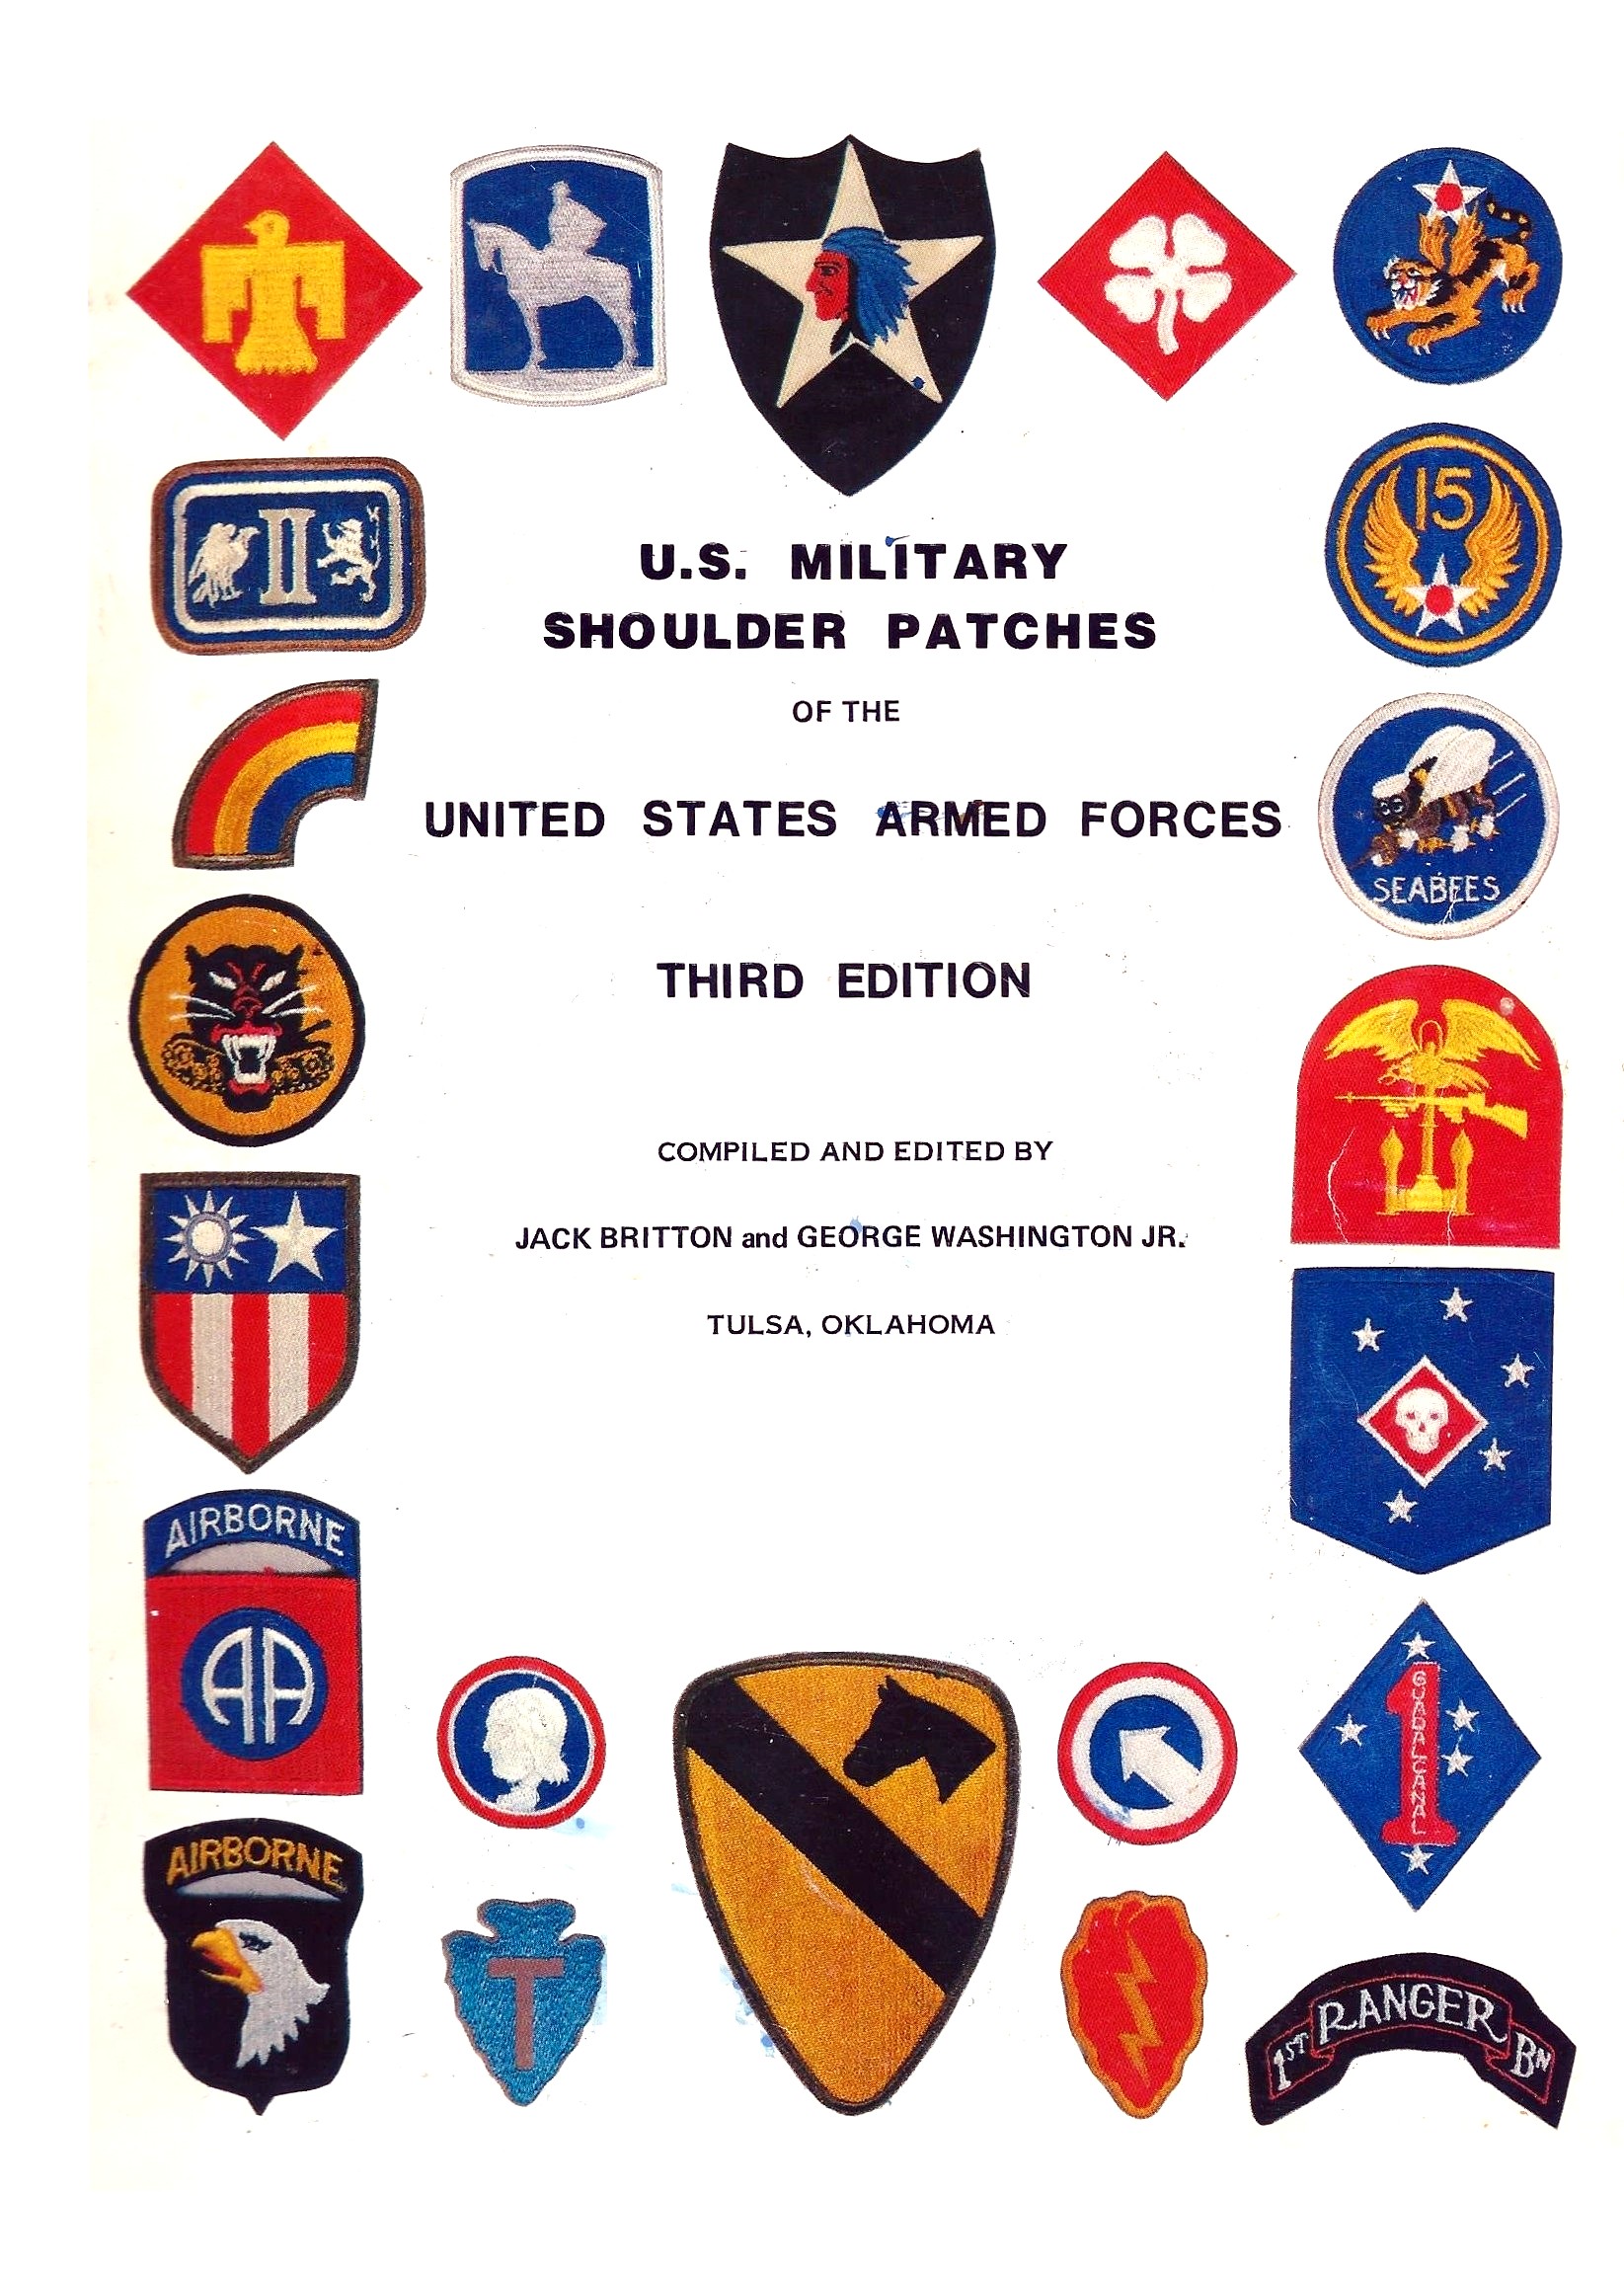 Part 1 of 3 Parts) U.S. Military Shoulder Patches of the United